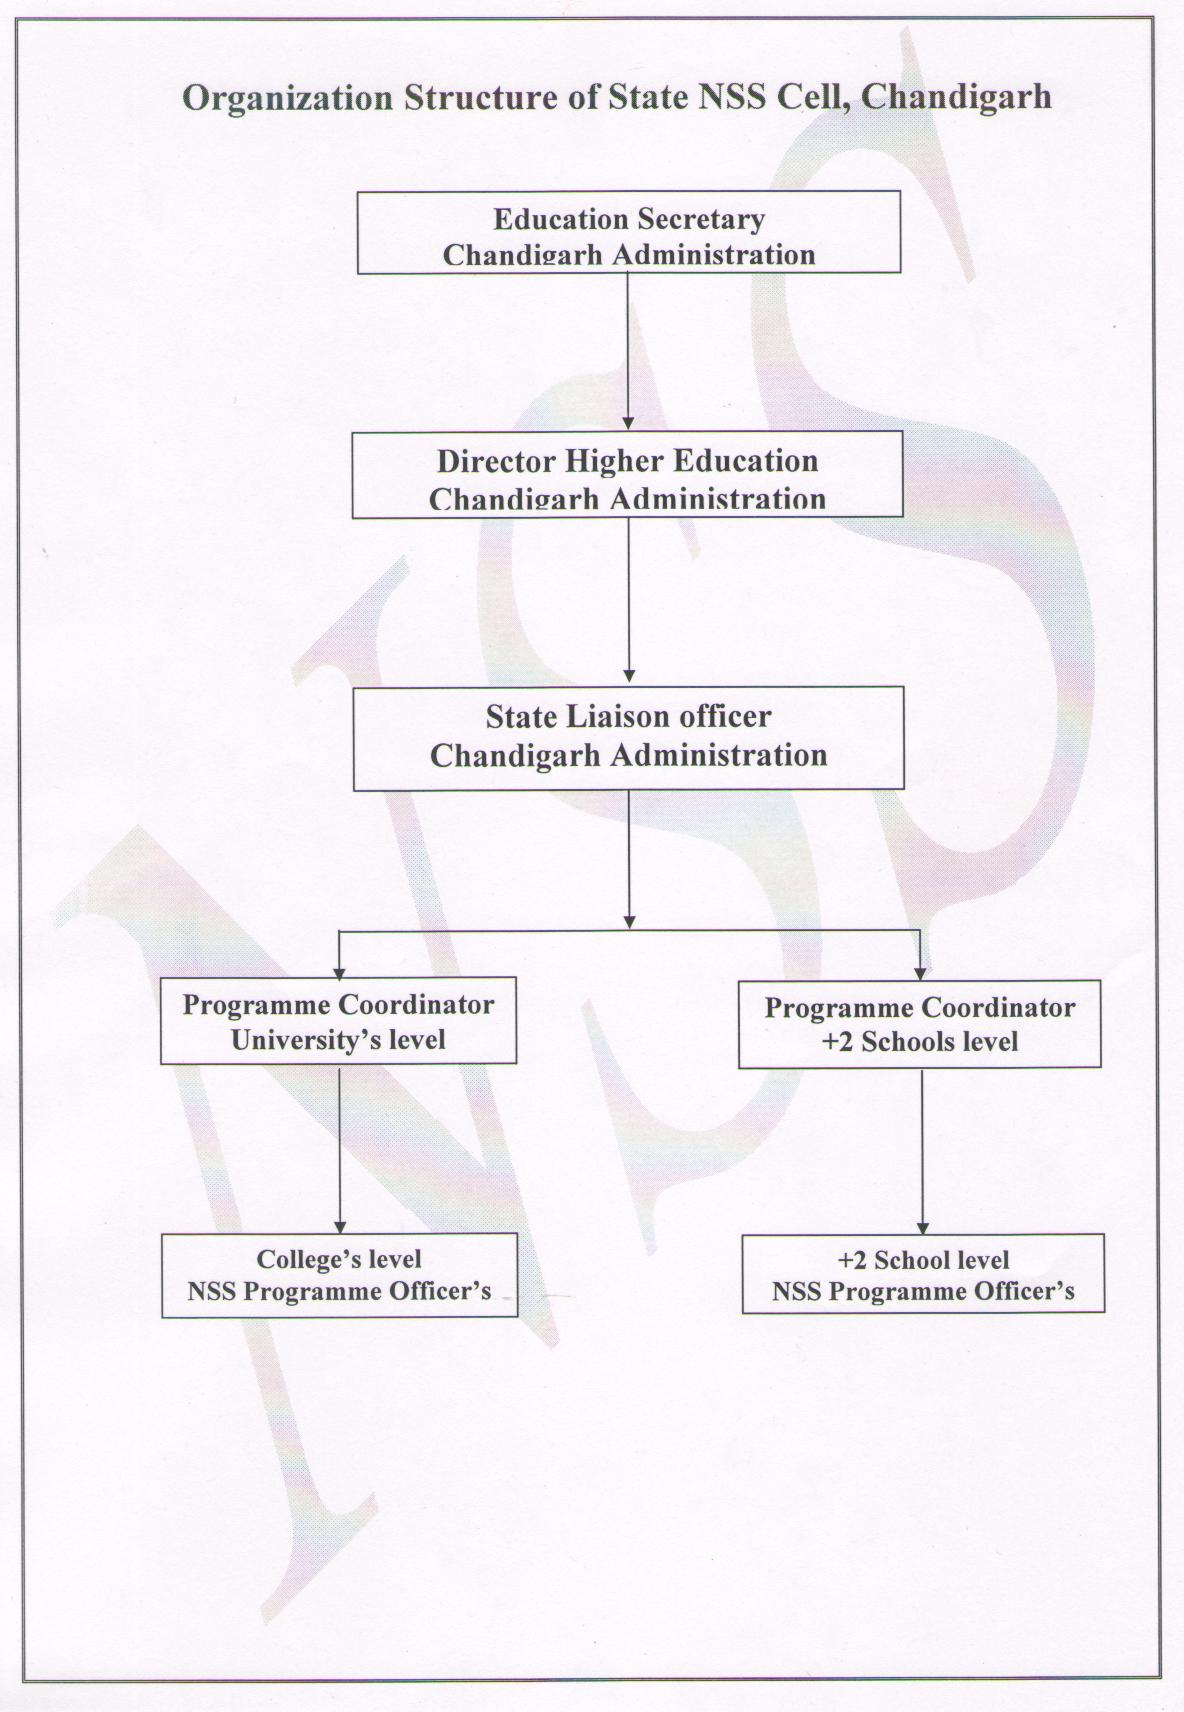 Organisation Structure of NSS